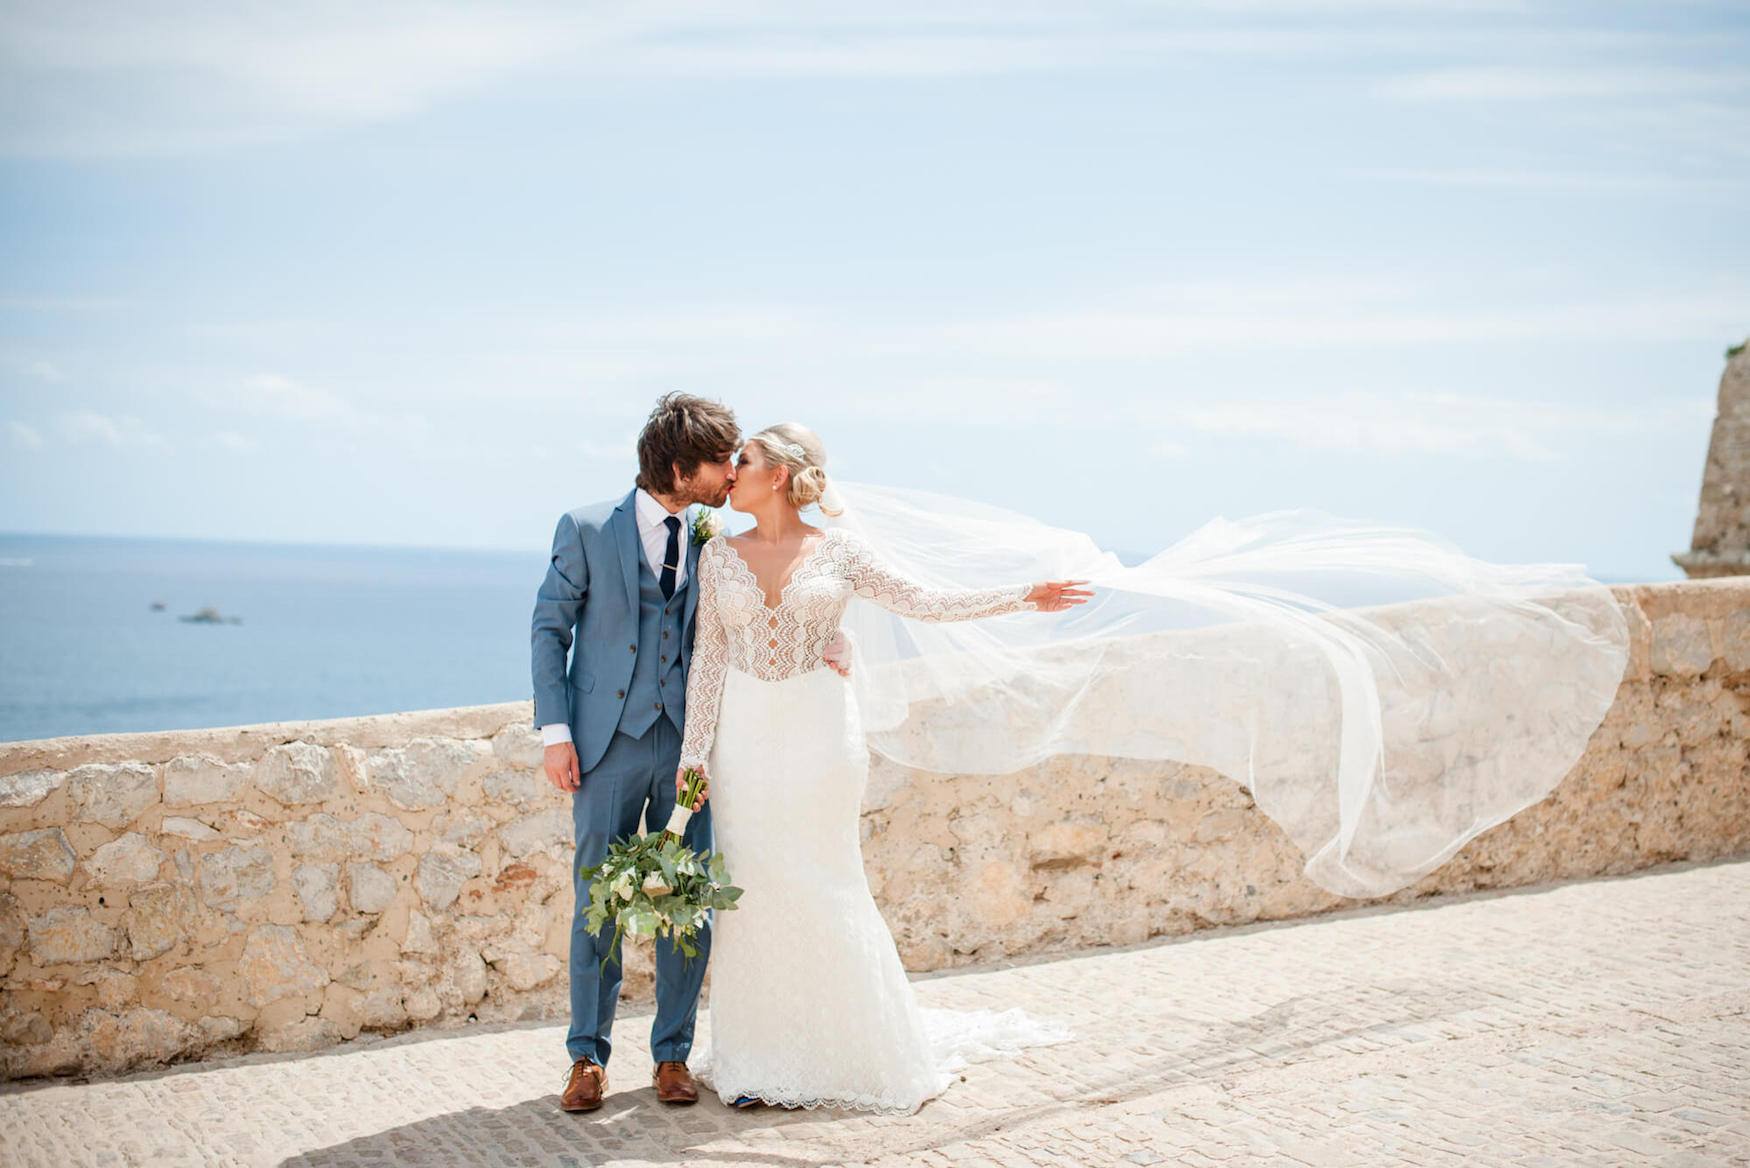 Wedding veil blowing in the wind at an Ibiza wedding